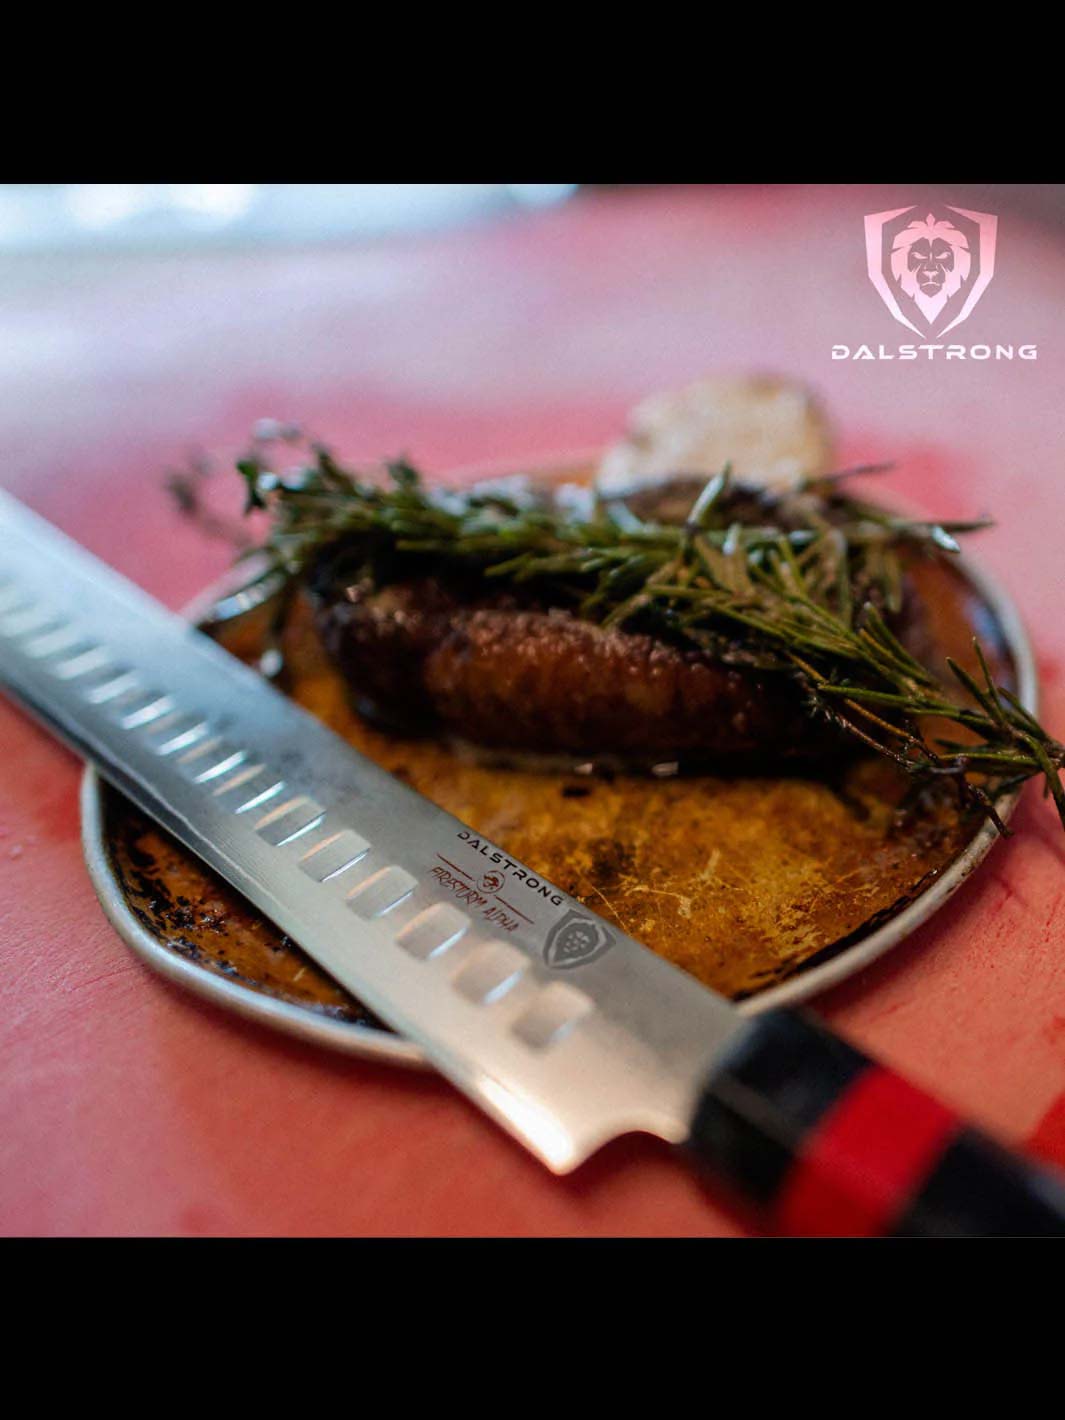 Dalstrong firestorm alpha series 12 inch slicer knife with wooden handle and a steak.